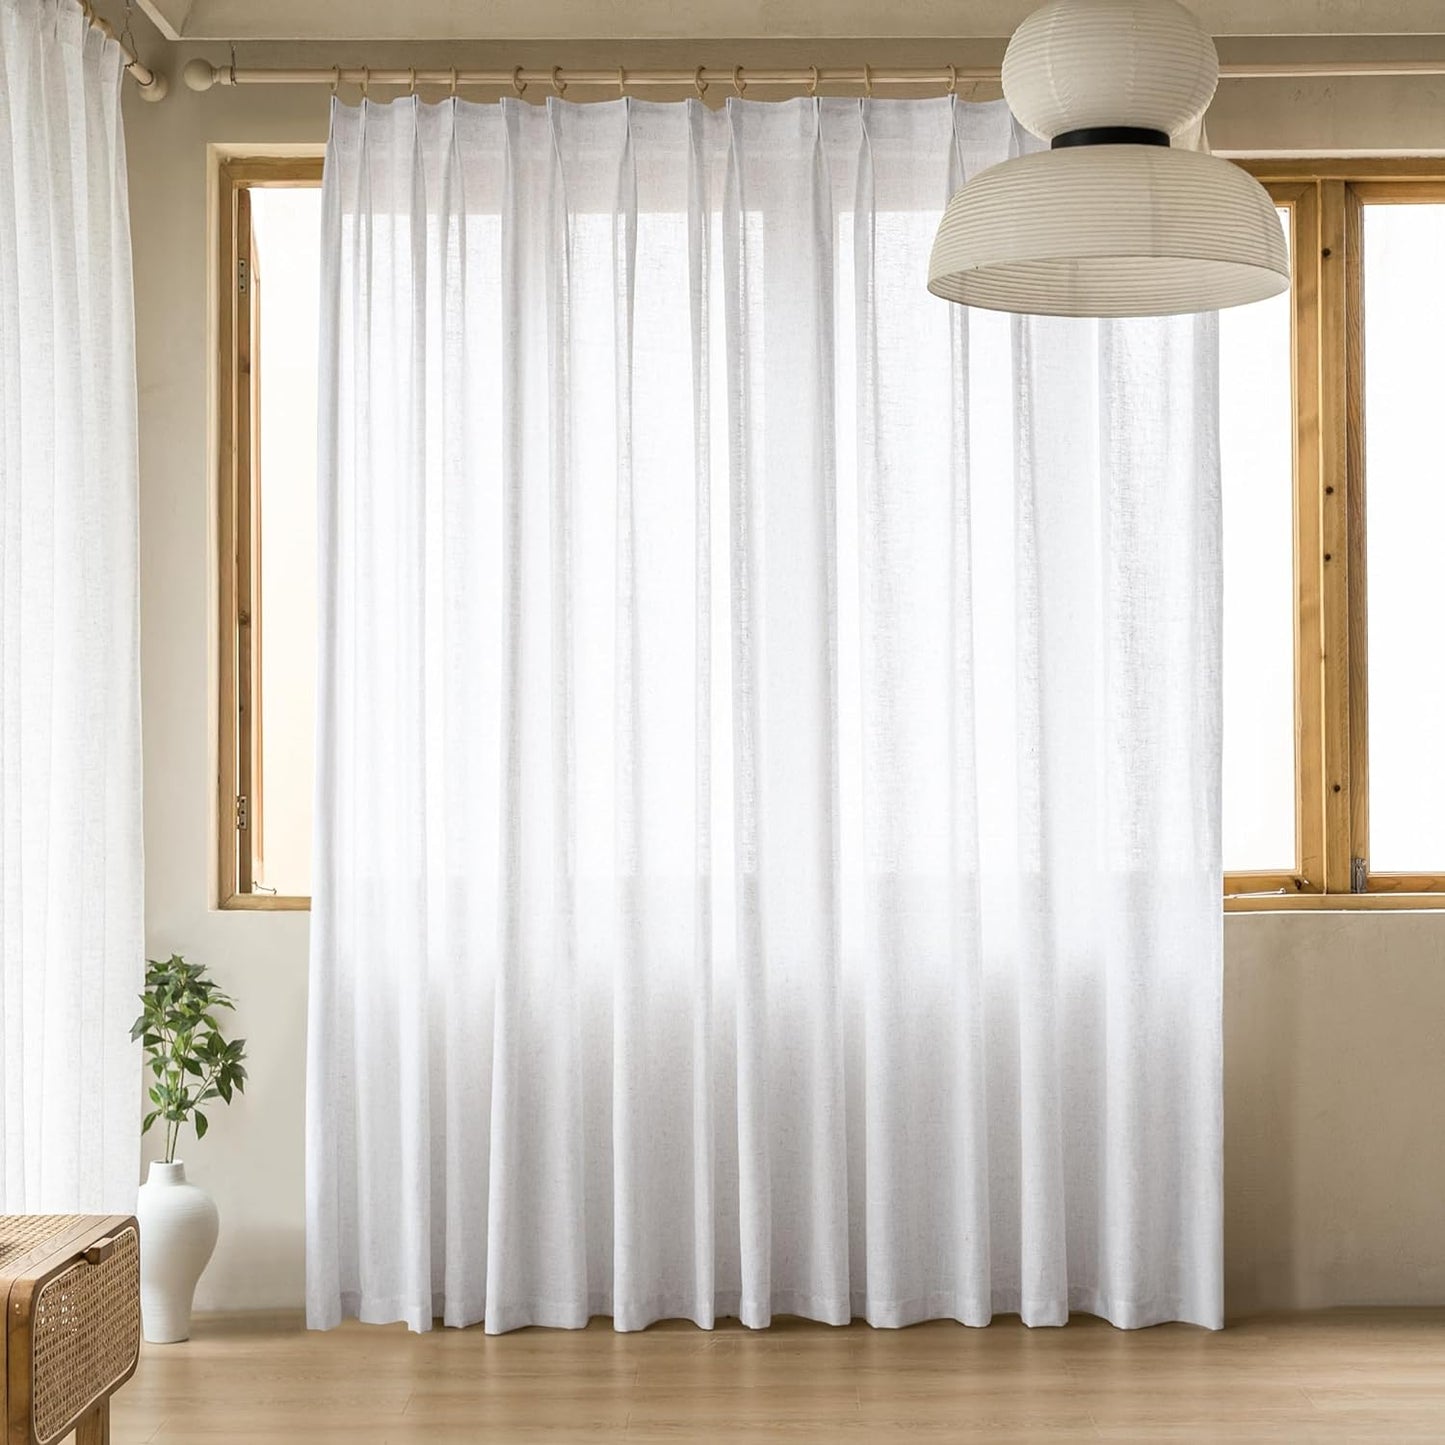 MAIHER Extra Wide Faux Linen Curtains Pinch Pleated, 108 Inches Long Light Filtering Semi Sheer Curtains Patio Door for Living Room, Pinch Pleat Drapes with Hooks (1 Panel, 84" W X 108" L)  MAIHER Beige White 54X84 